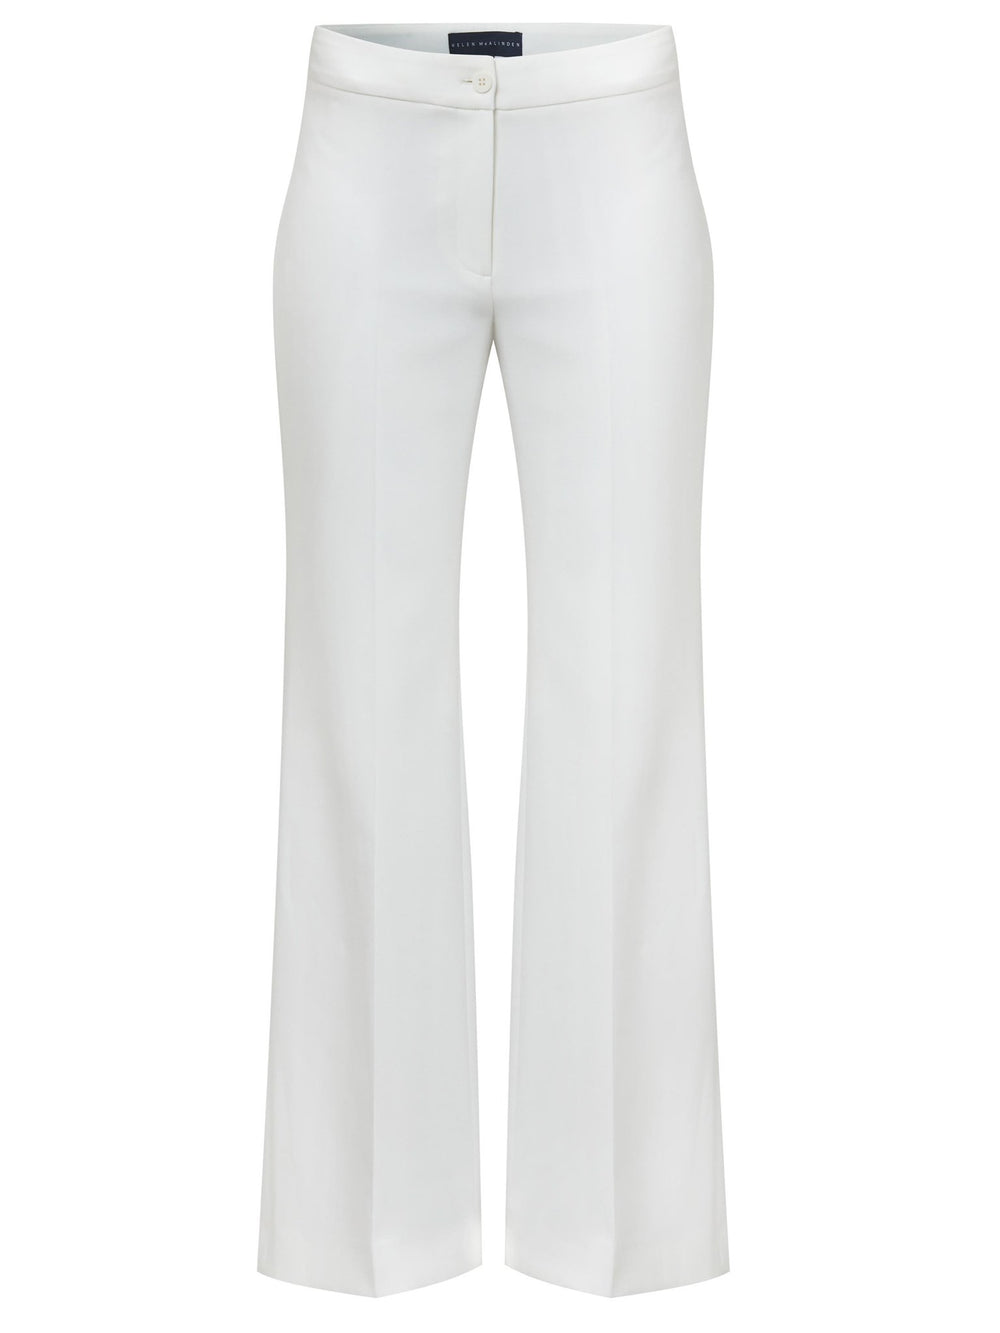 Kelly, an iconic white flare pant. Crafted in sustainable double crepe with a hint of stretch. Revisit the 70's for this season’s game-changing look. Flares are sophisticated, comfortable & leg-lengthening. Guaranteed to flatter the form & never far from fashion’s front line.